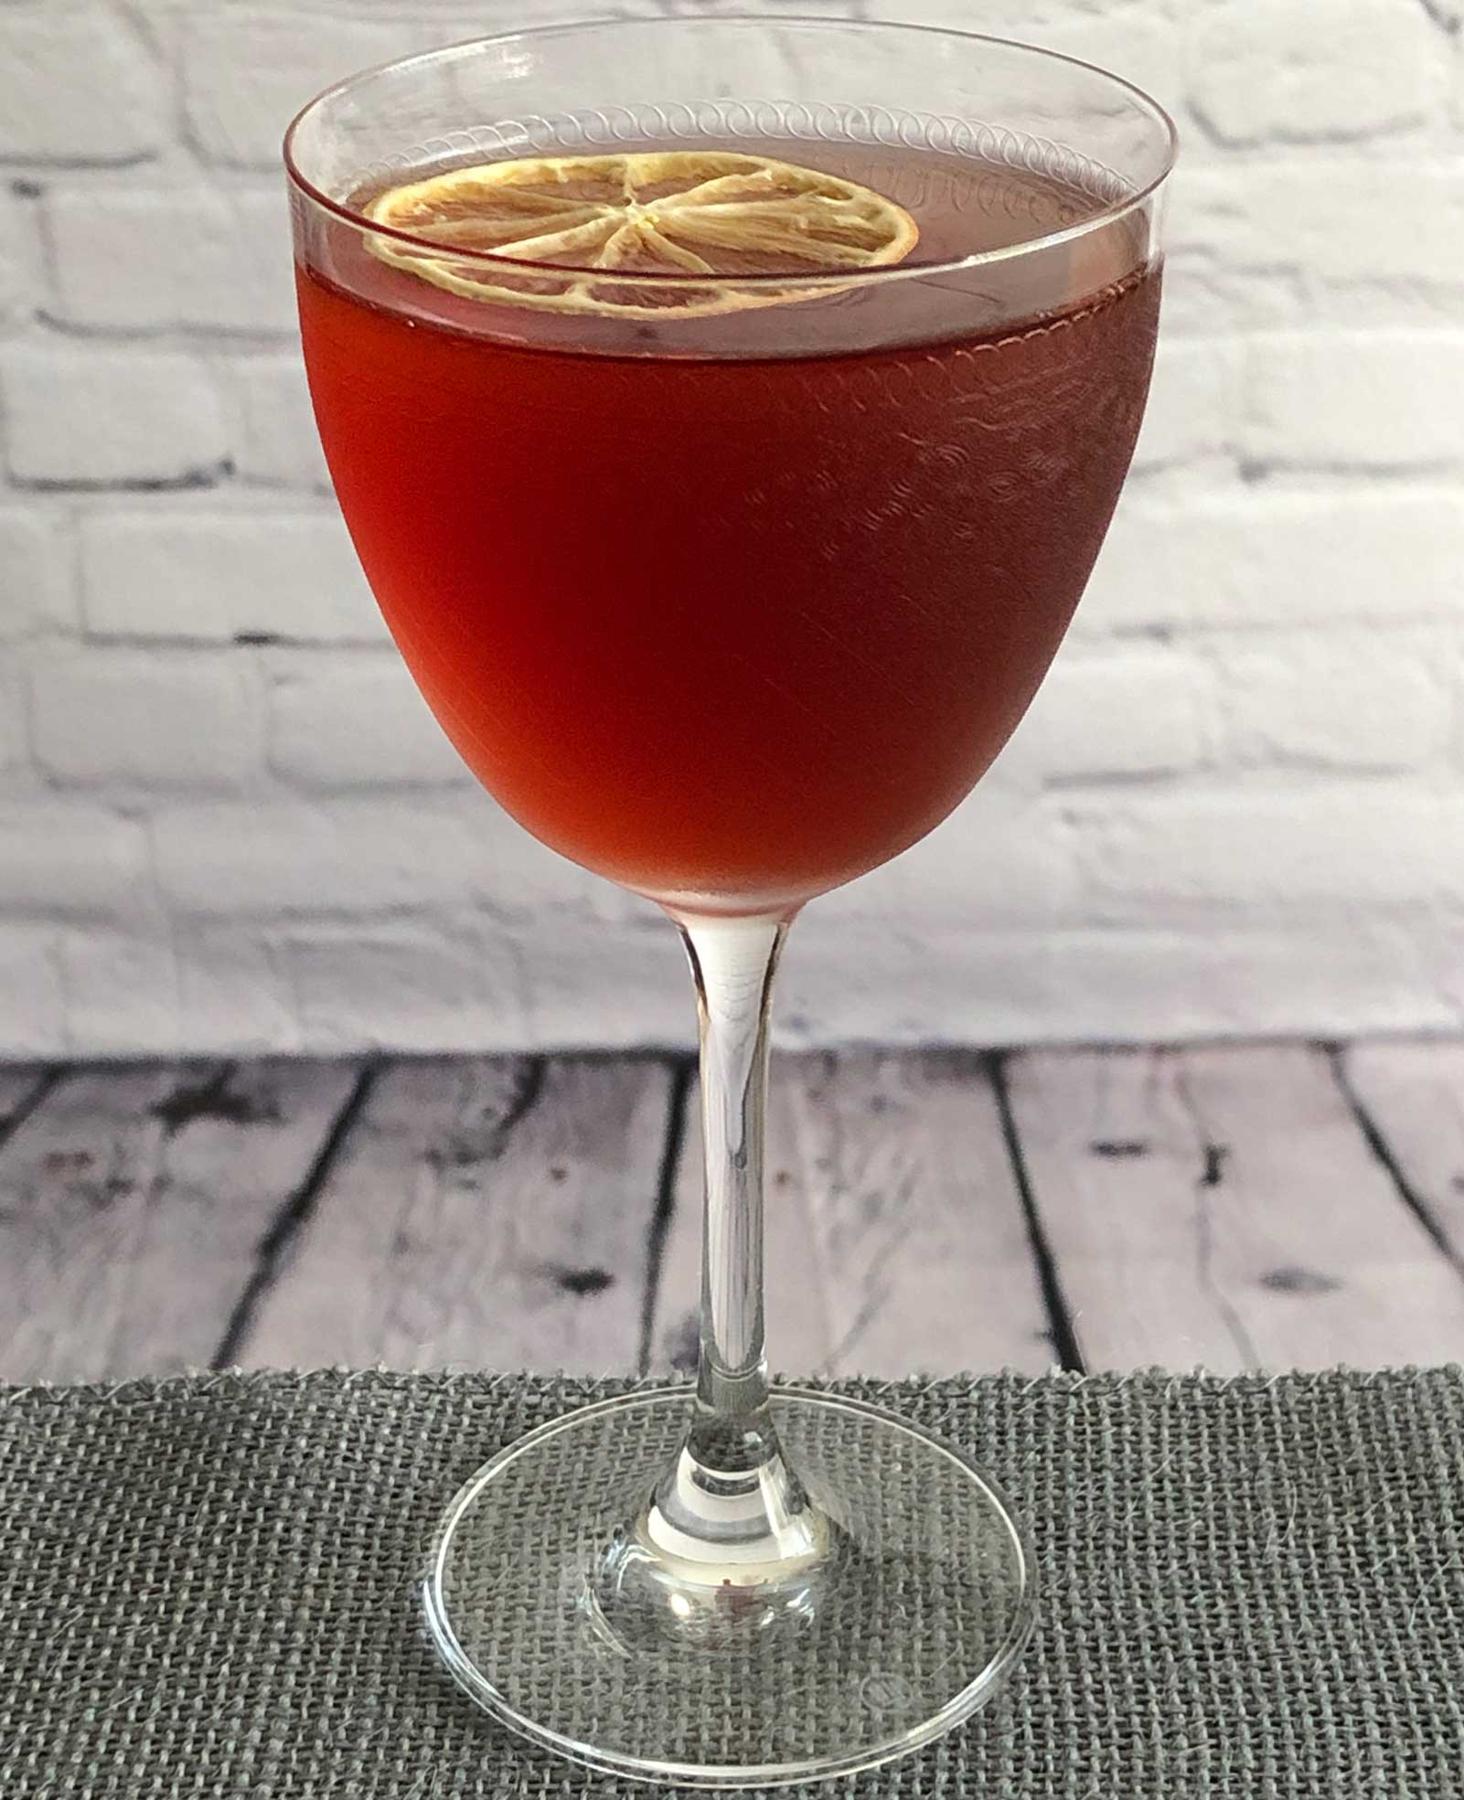 An example of the The Prime Directive no. 2, the mixed drink (drink) featuring Dolin Dry Vermouth de Chambéry, Salers Gentian Apéritif, Byrrh Grand Quinquina, and lemon twist; photo by Lee Edwards